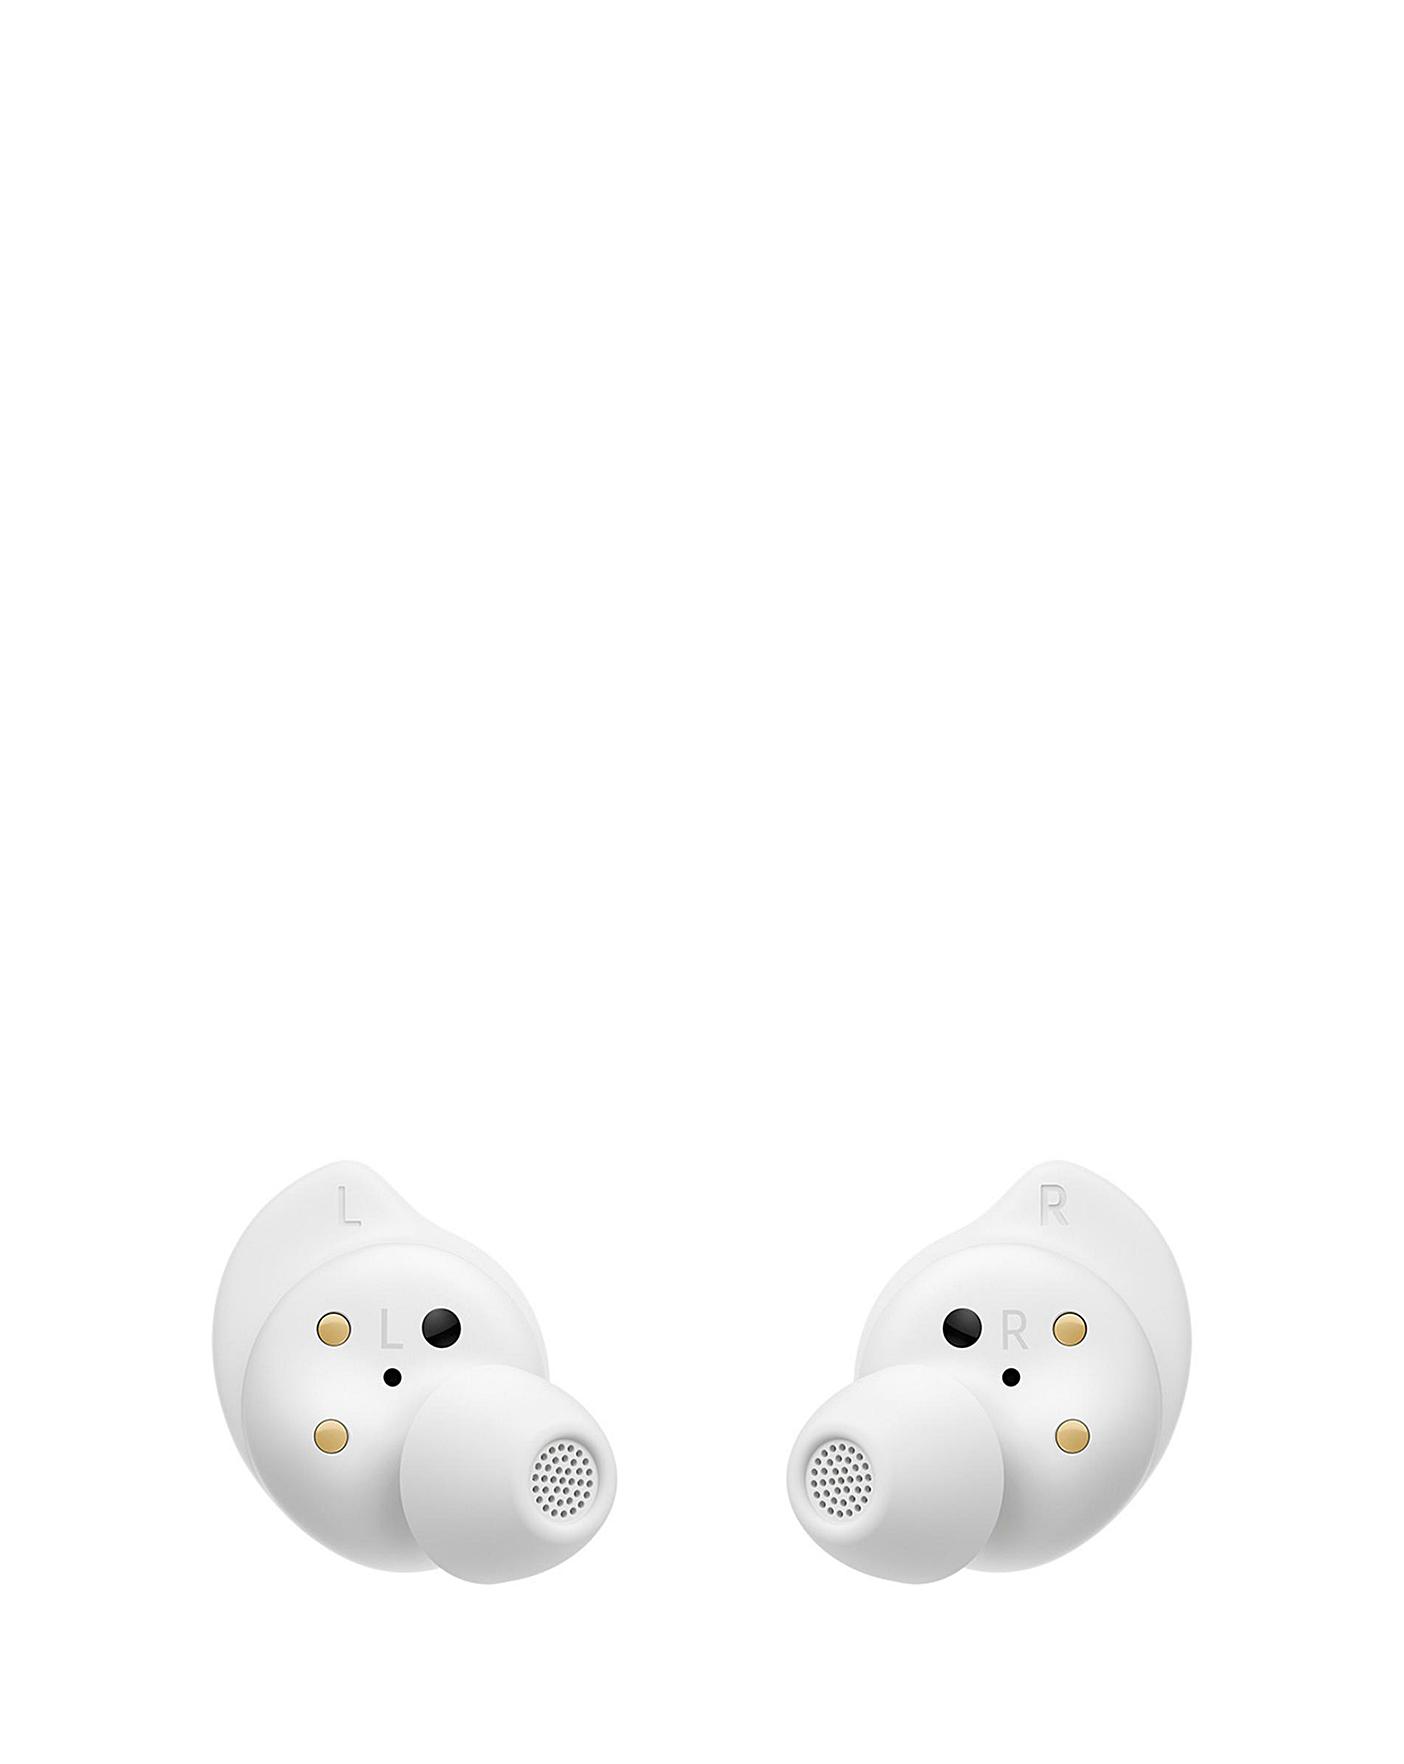 Galaxy Buds FE - S Store Sv